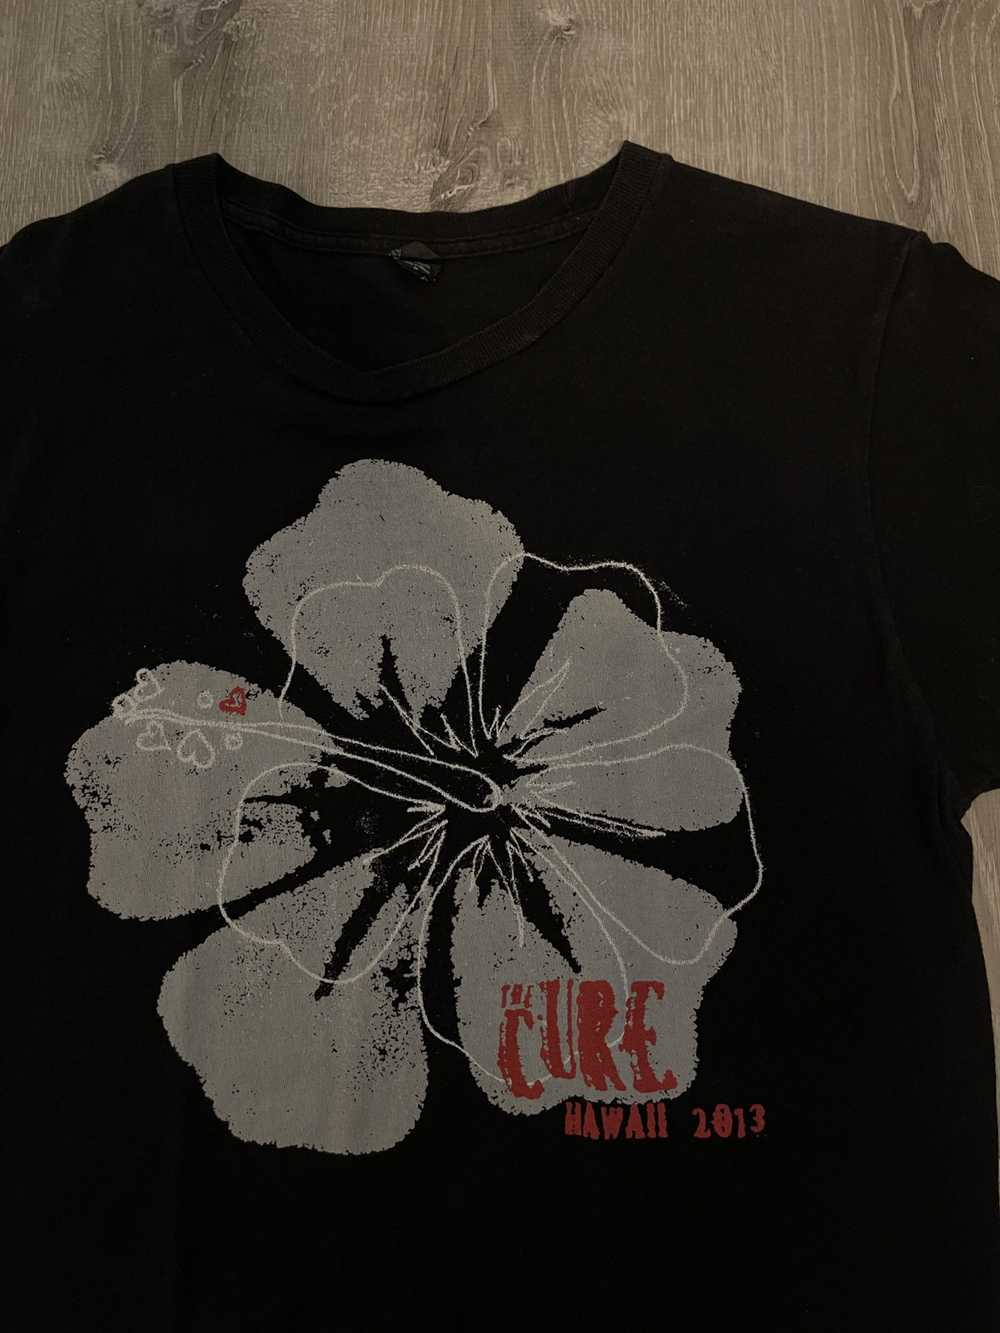 The Cure RARE The Cure 2013 Hawaii Tour T-Shirt - image 2